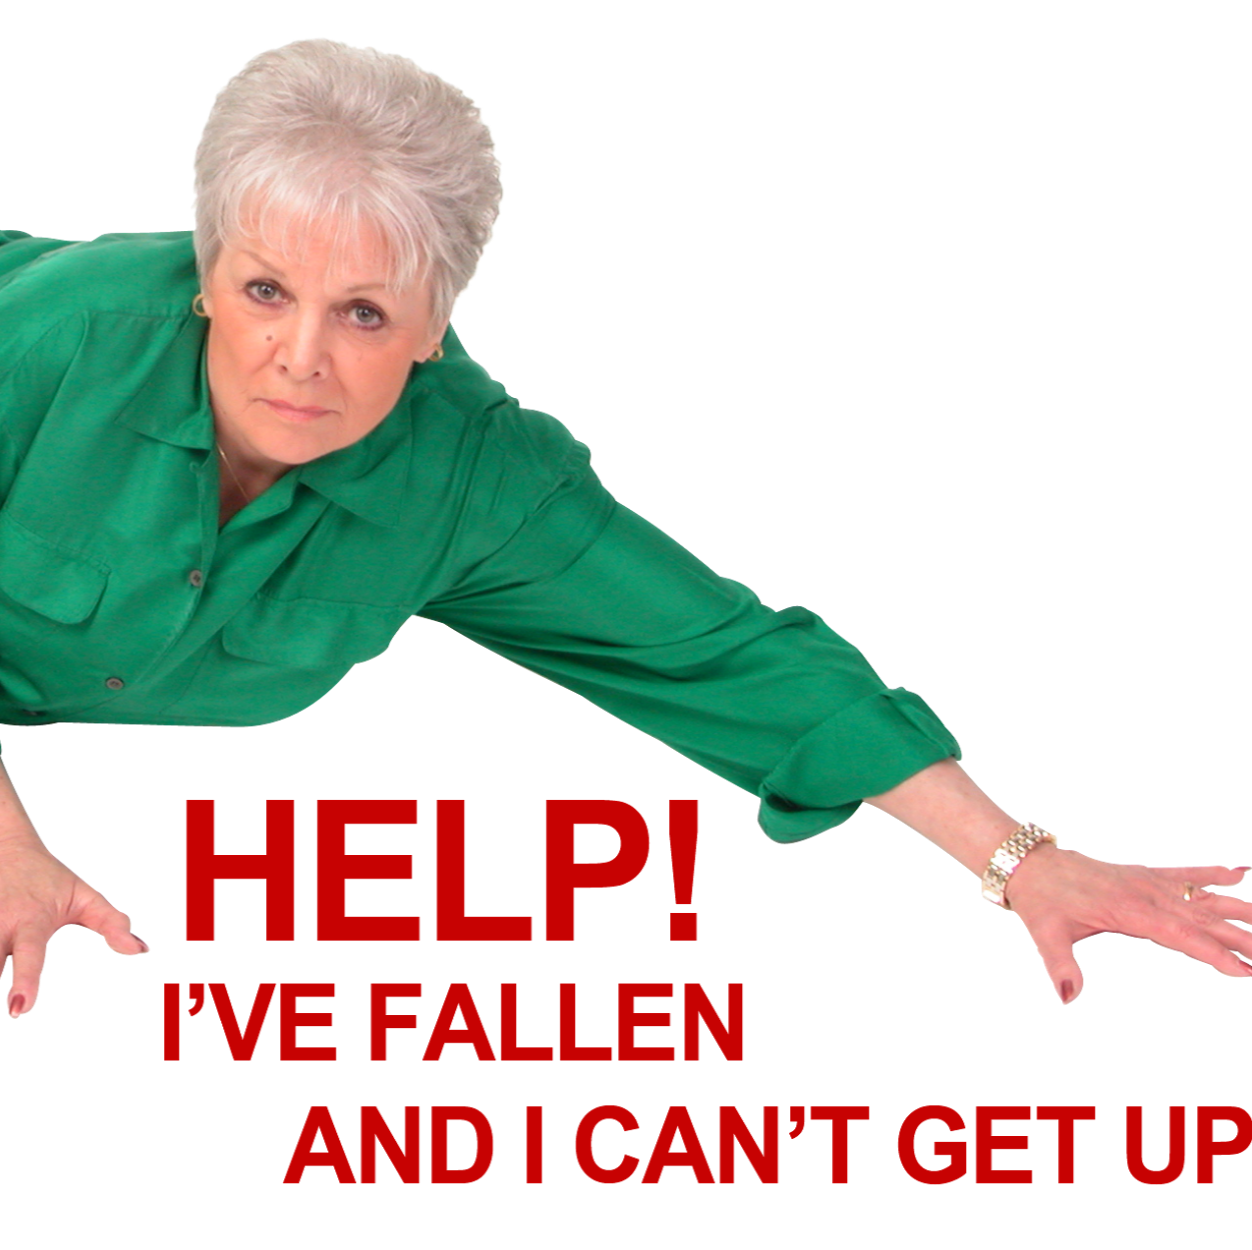 Help, I’ve fallen and I can’t get up! 